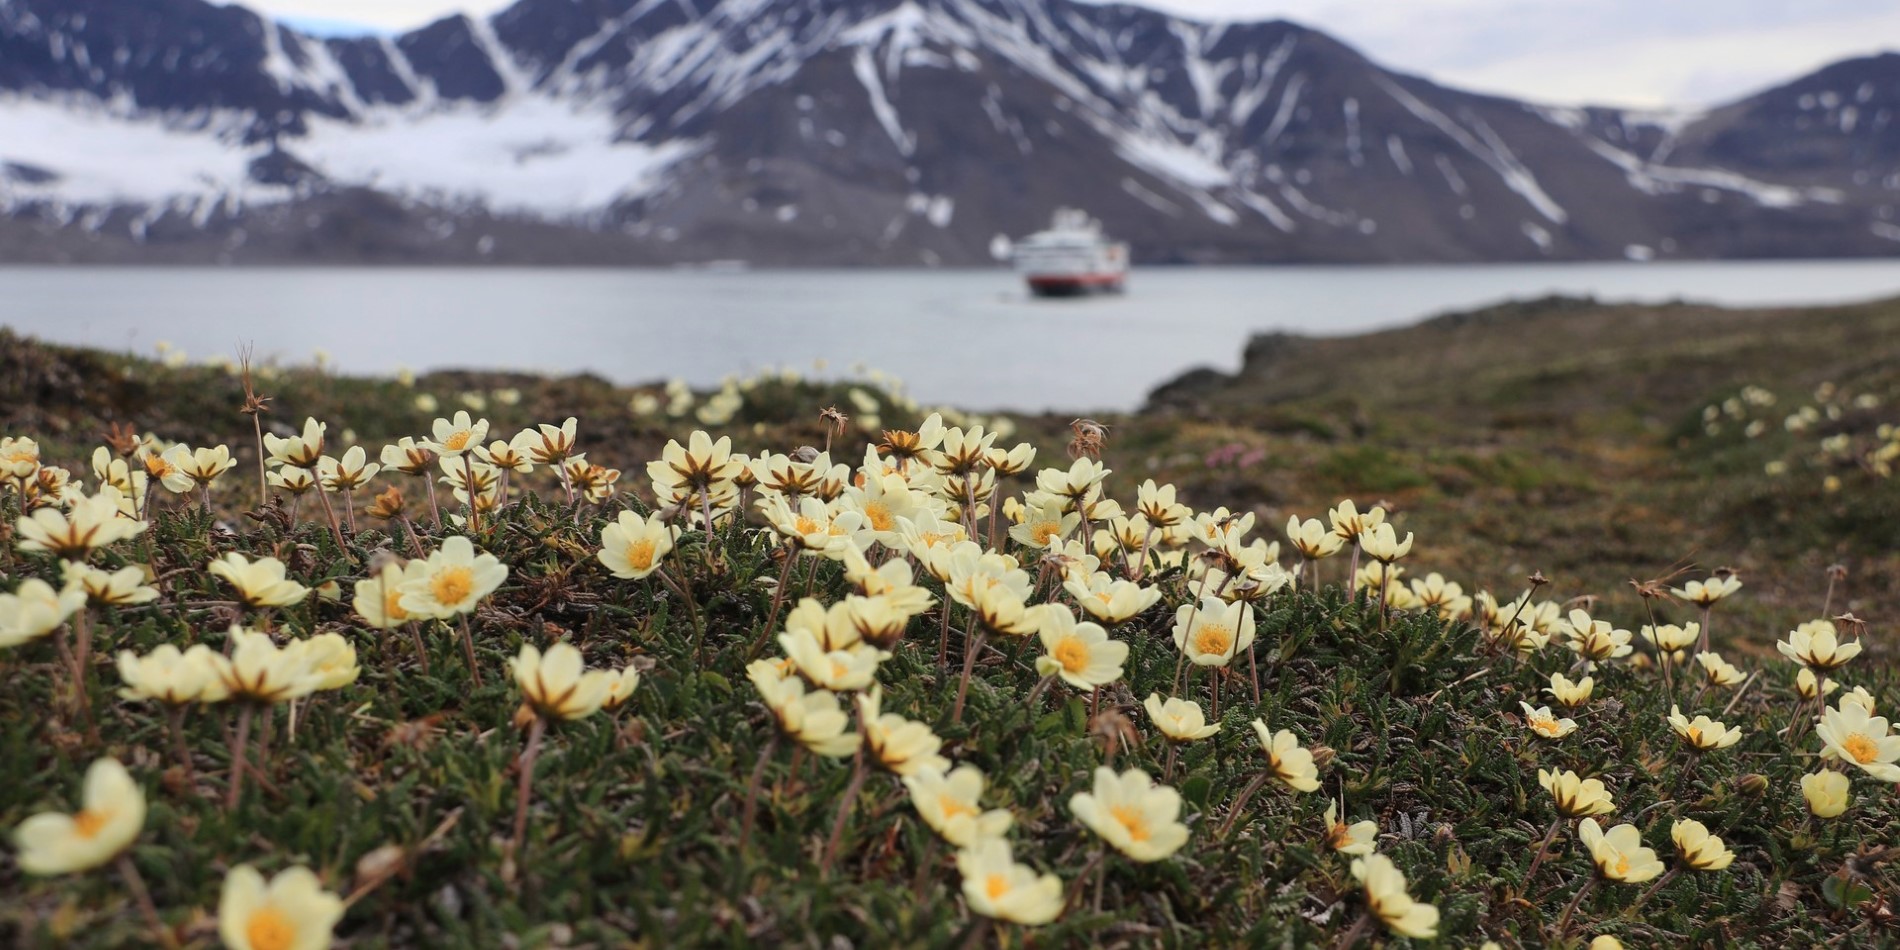 Exploring St Jonsfjord's beautiful wilderness and old settlements